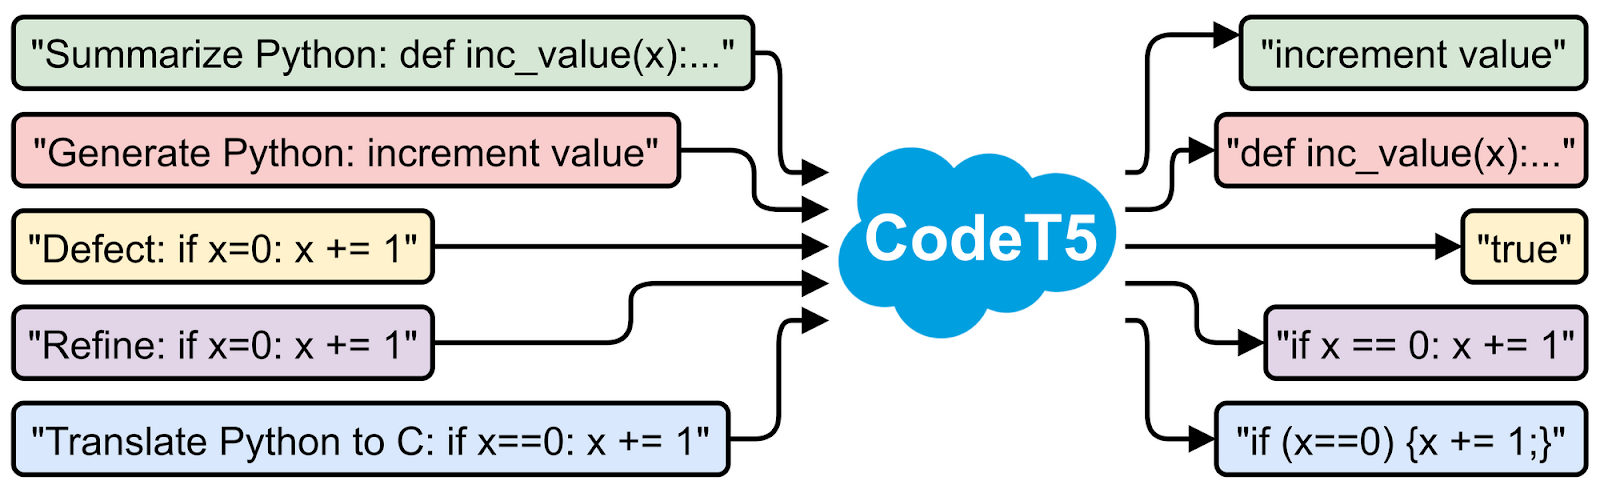 An image of the different coding function Salesforce's CodeT5 tools uses like Summarize, Generate Python, Increment value, Include value, Defect, Refine, etc.